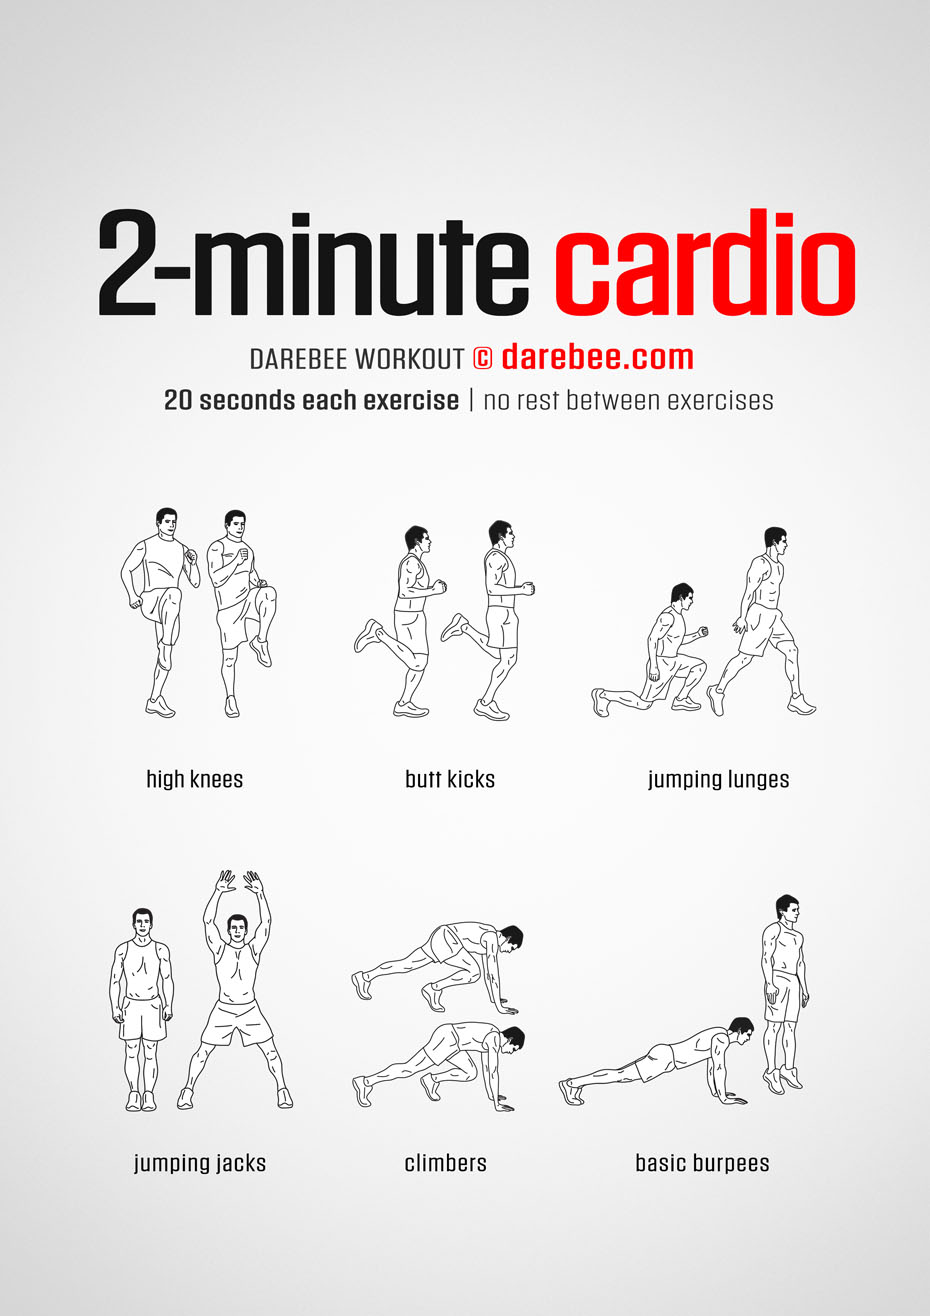 daily cardio workout to lower heart disease